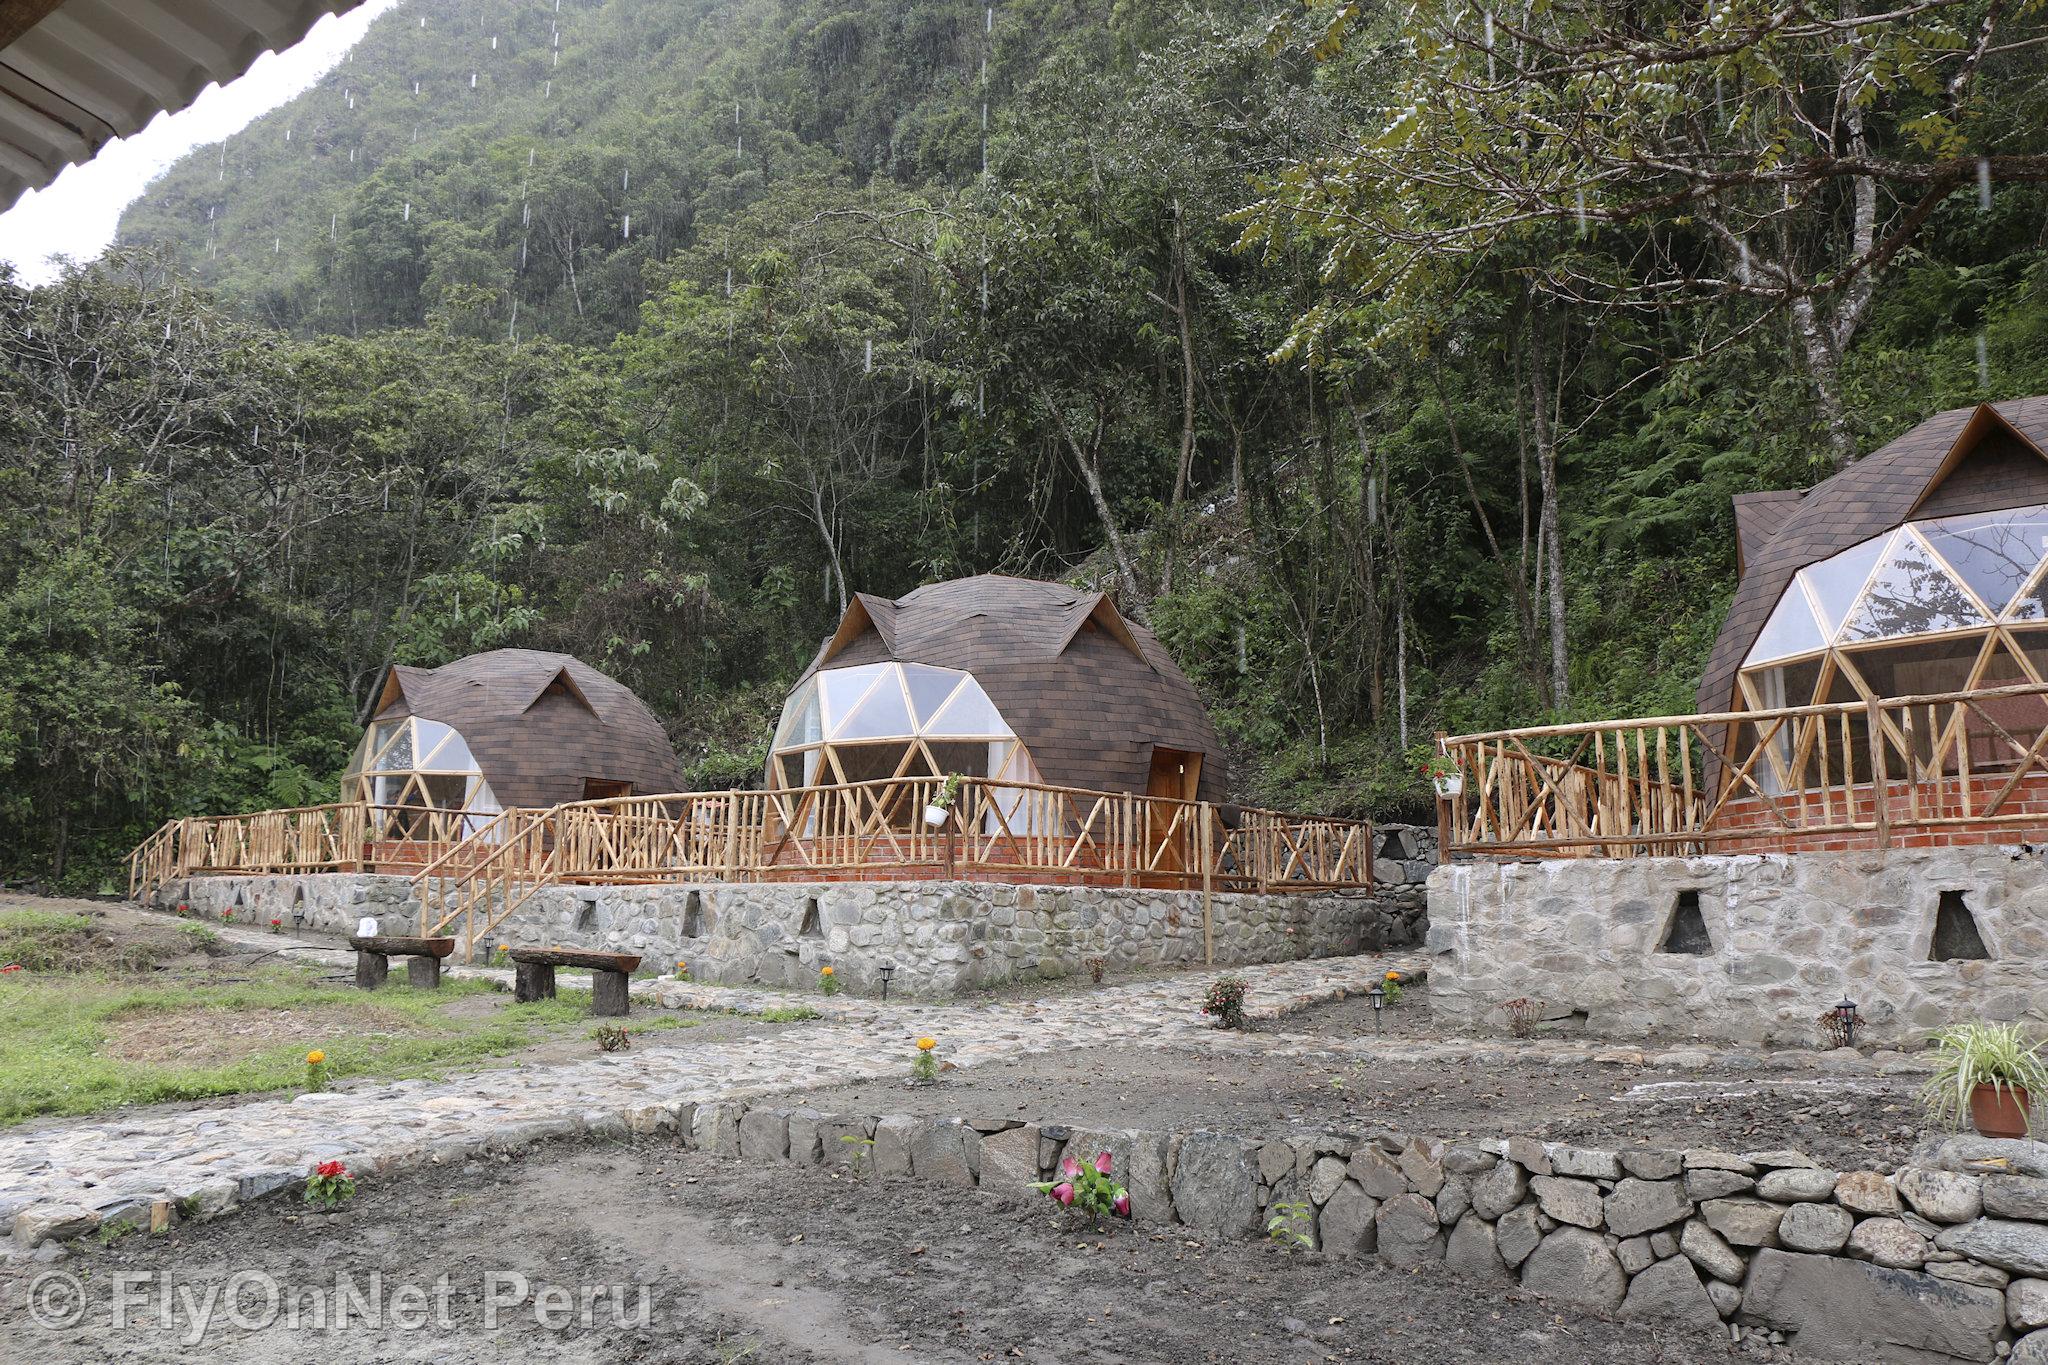 Photo Album: General view of the domes, Ecolodge Majestic